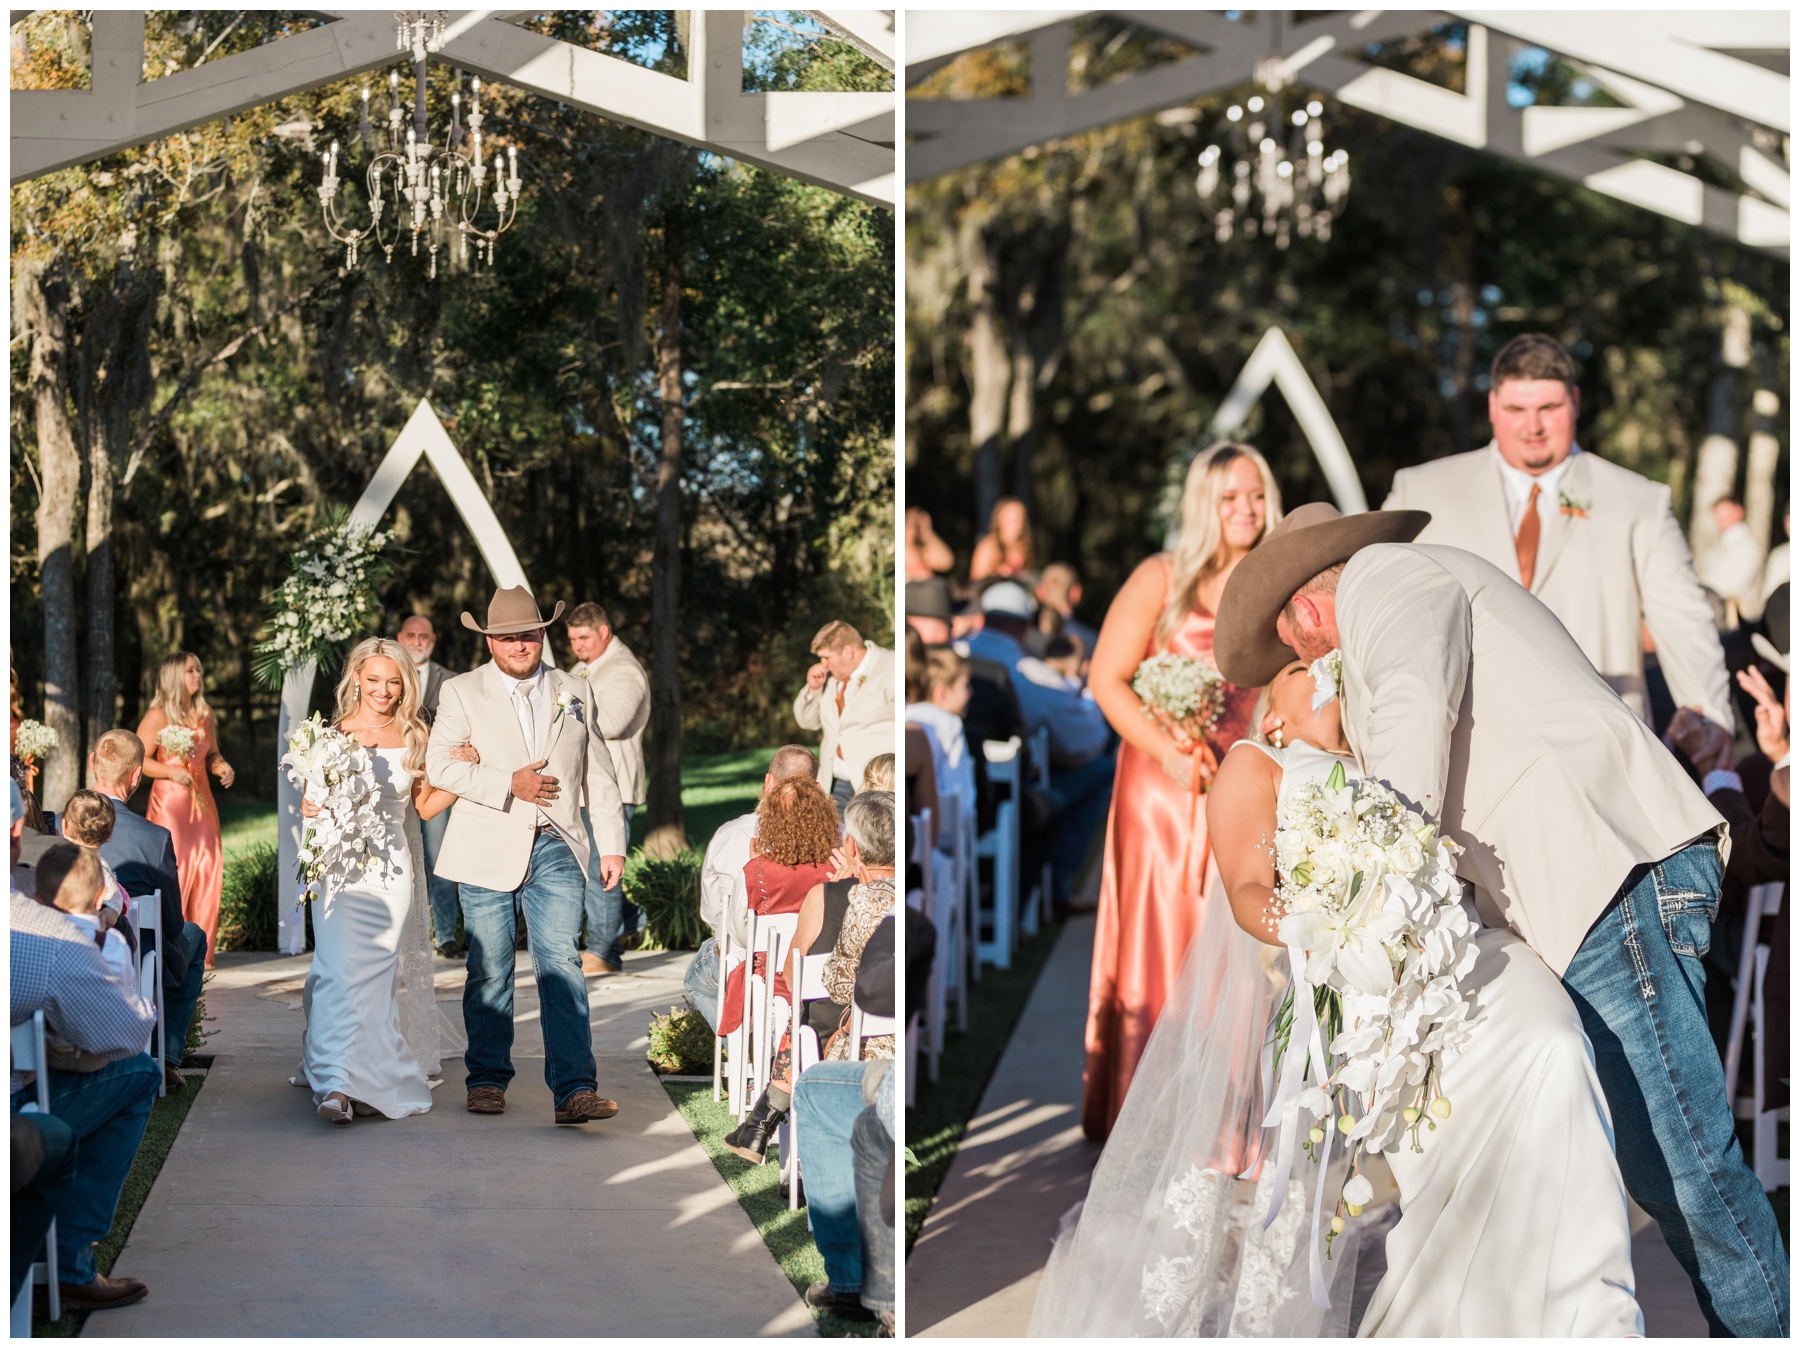 Outdoor wedding ceremony at The Springs in Wallisville